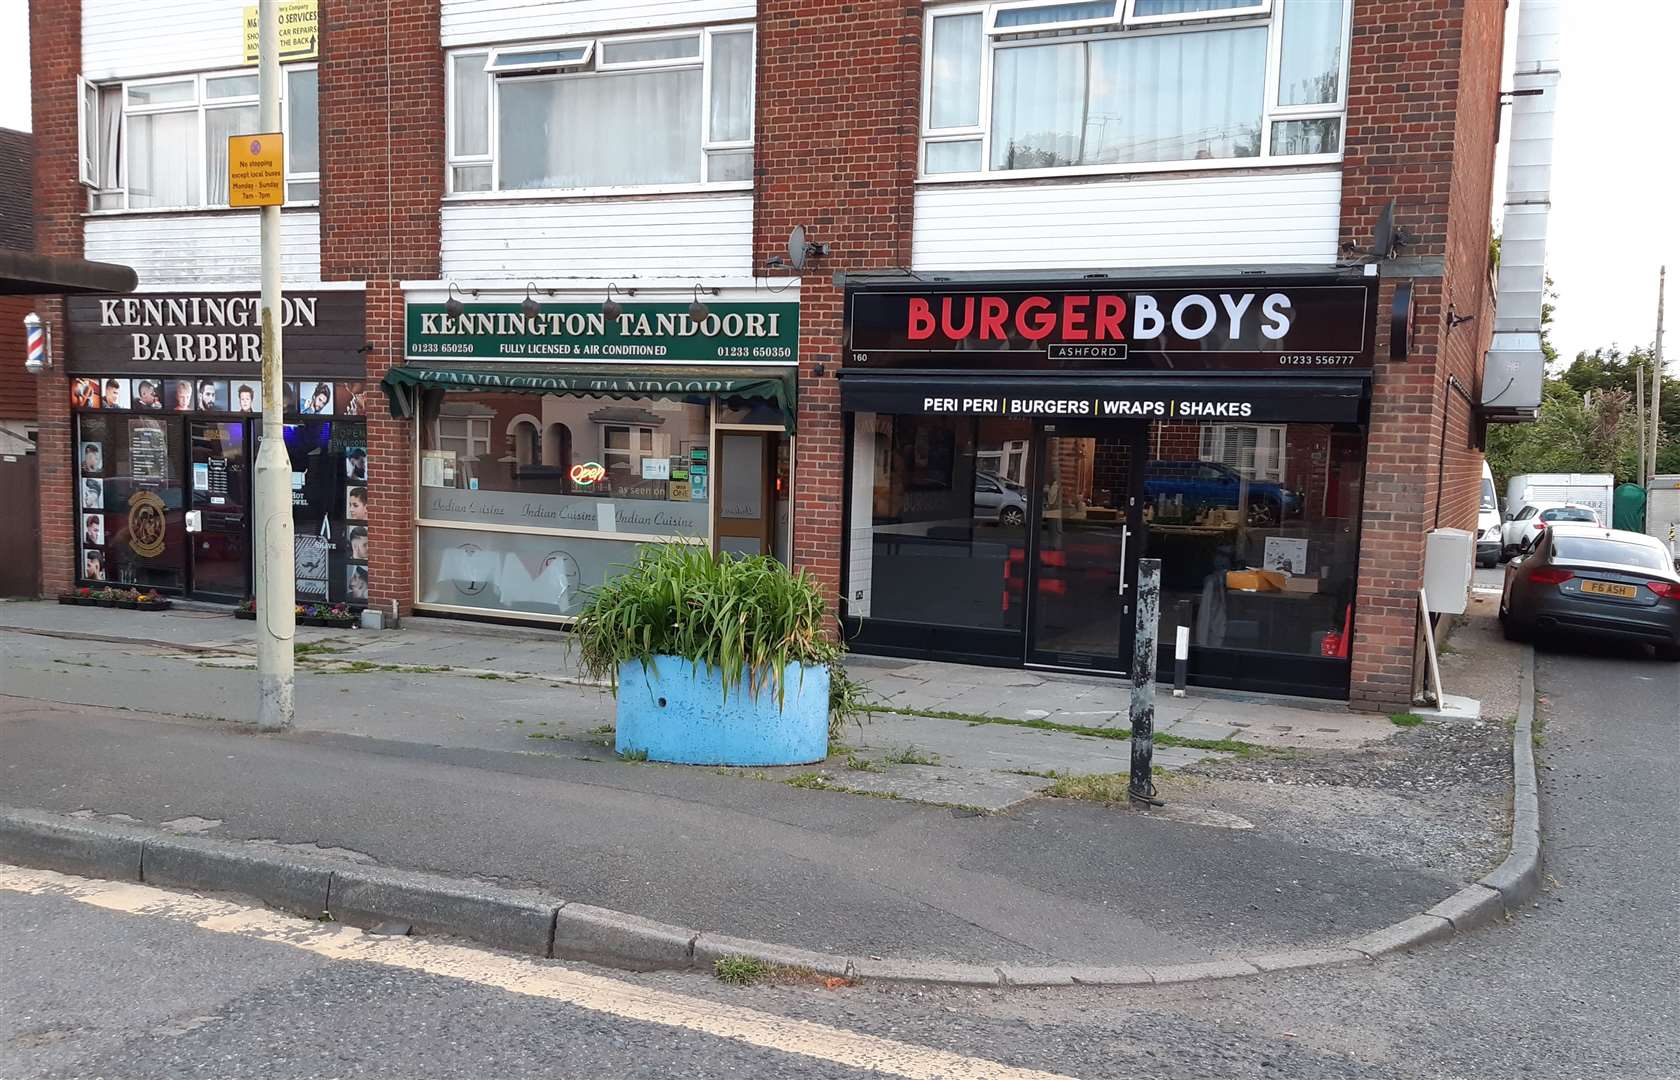 Burger Boys opened during the summer in Faversham Road